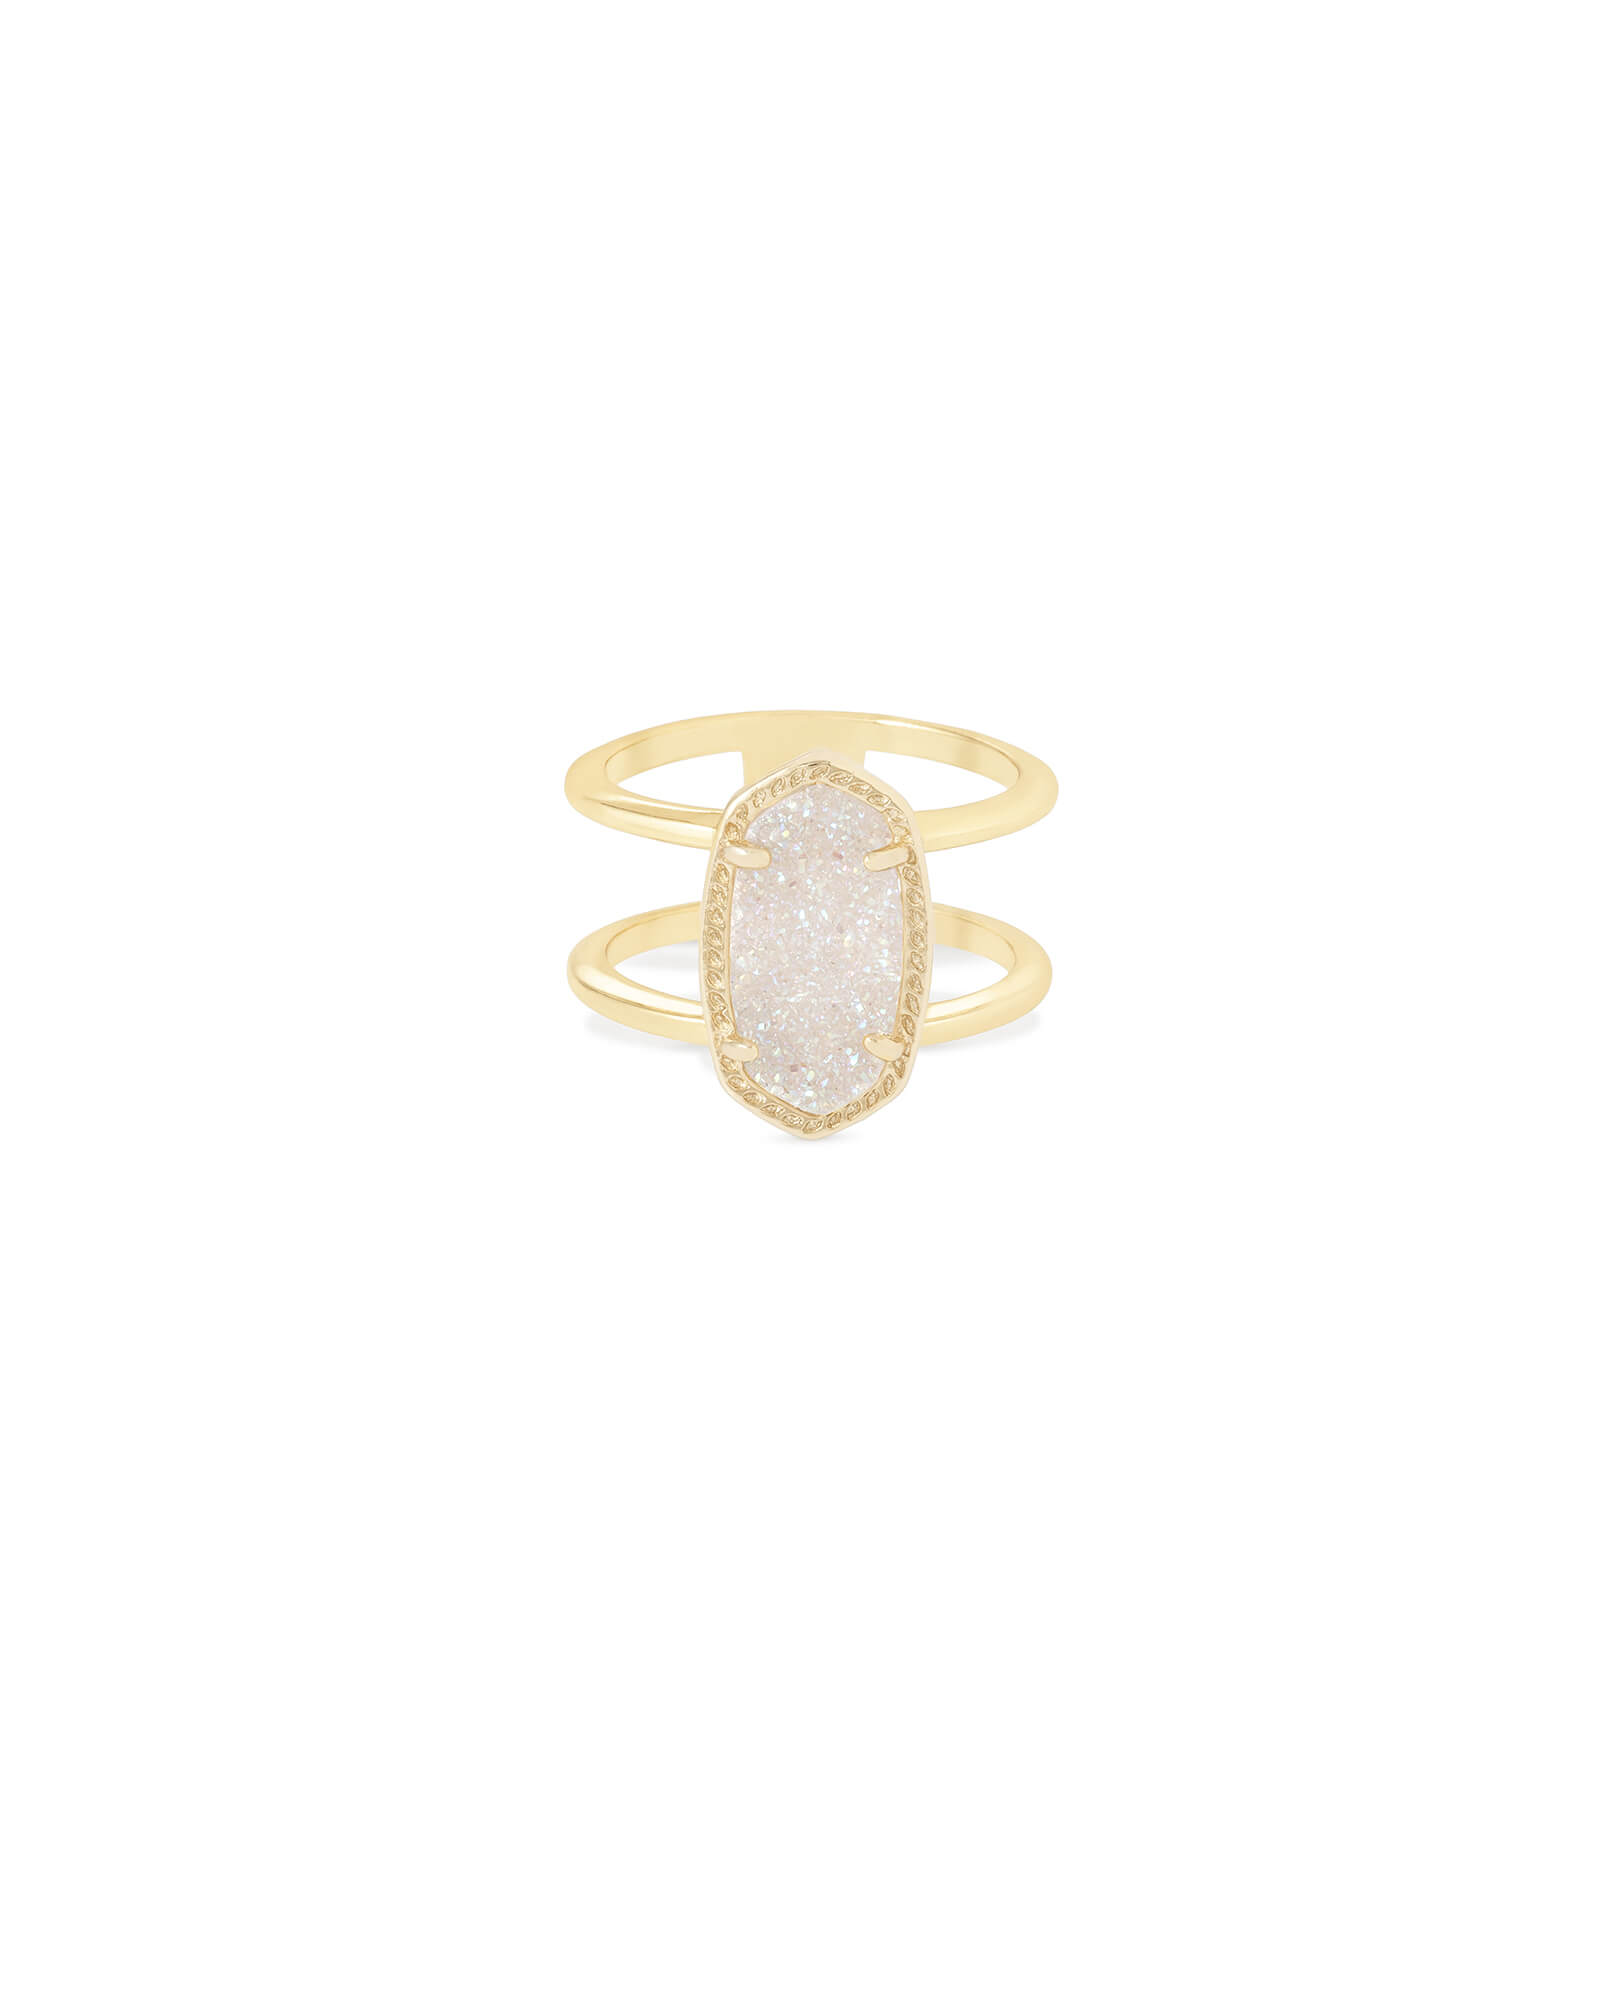 Juliette Gold Band Ring in White Crystal | Kendra Scott